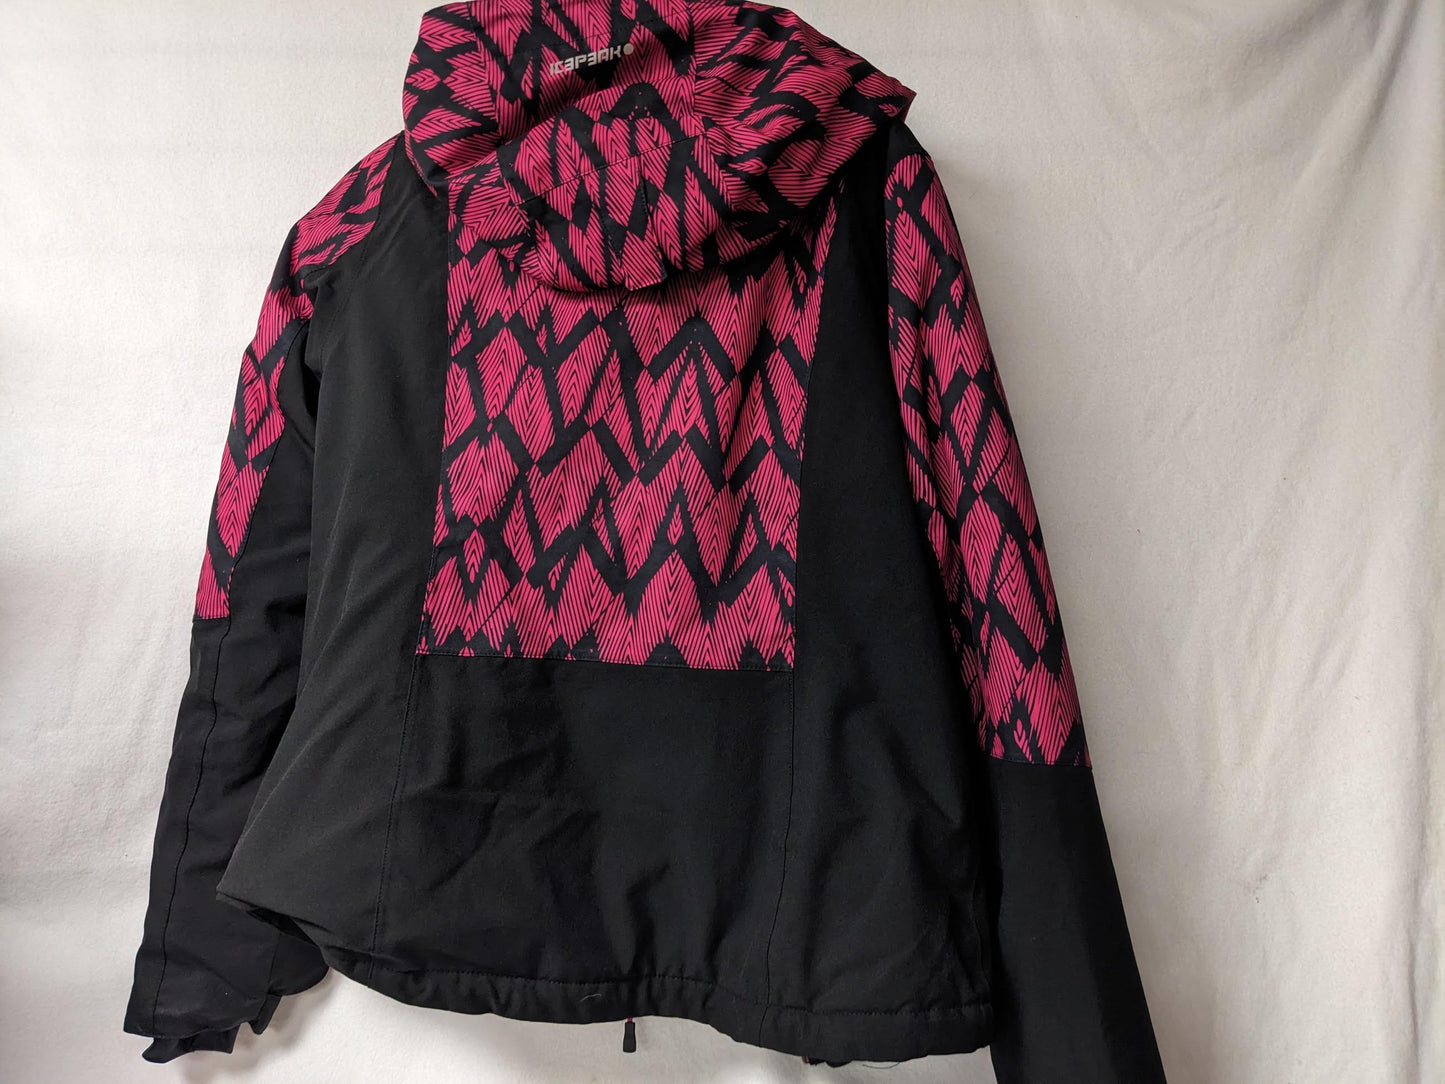 Icepeak Hooded Women's Ski/Board Coat/Jacket Size Women's XL Color Pink Condition Used